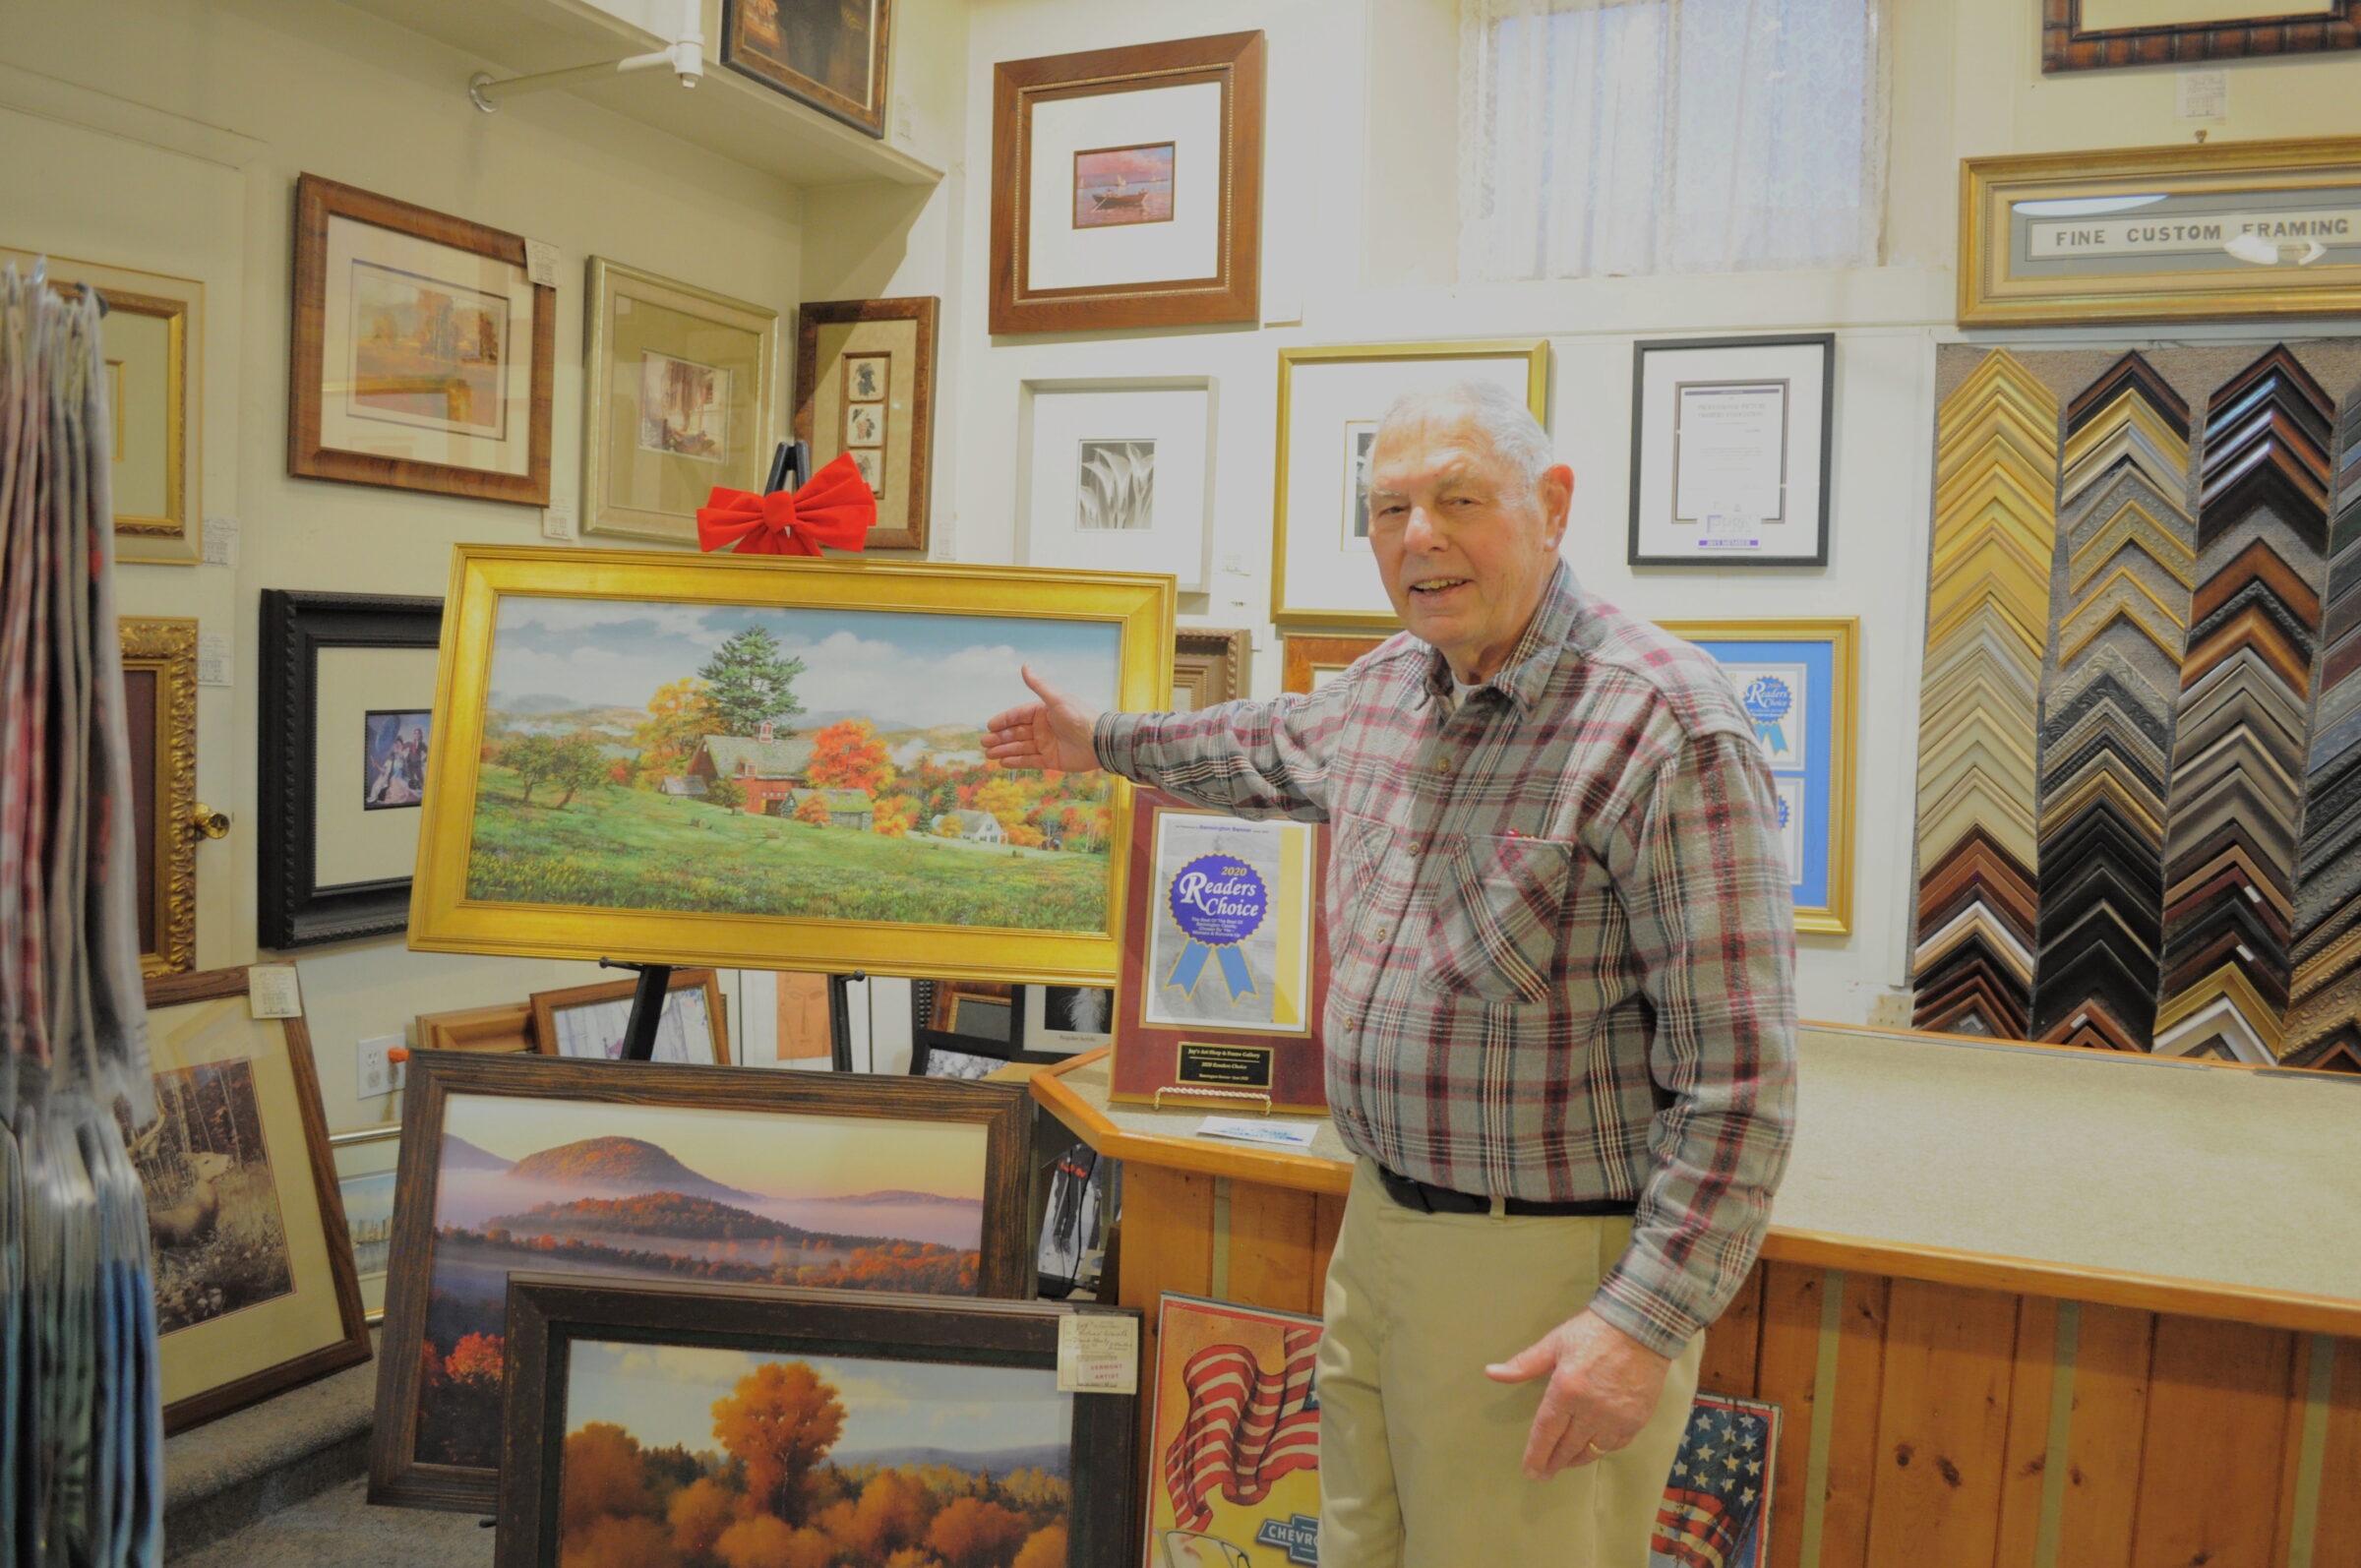 Photo of an elderly man, Jay Zwynenburg, standing inside the picture framing section of an art supply store.